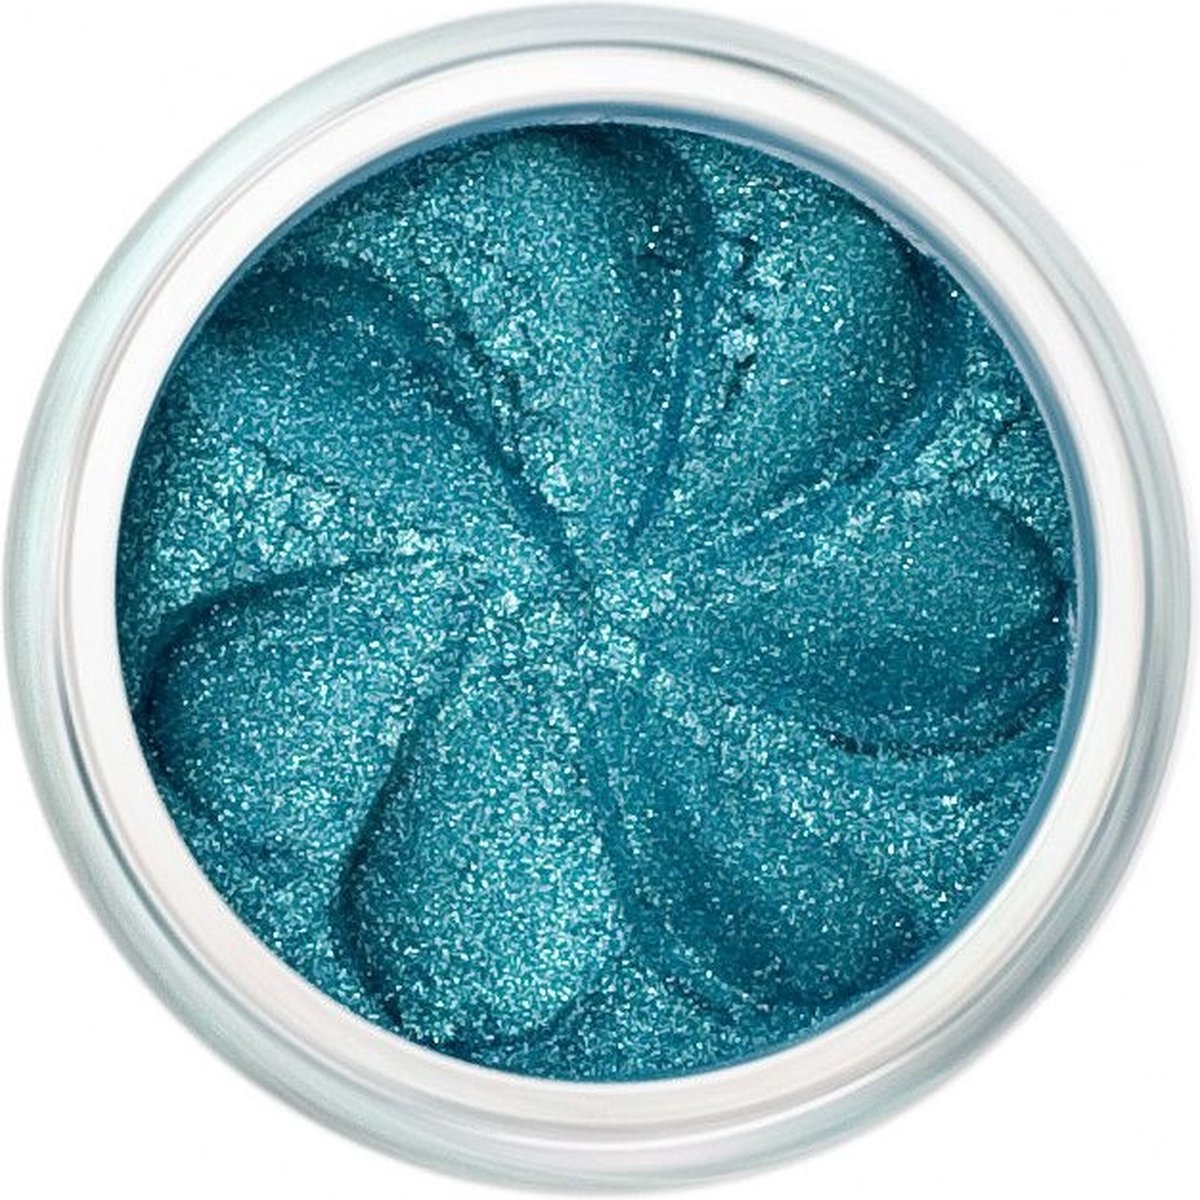 Lily Lolo Loose Eye Shadow Pixie Sparkle 2,5gr - Oogschaduw